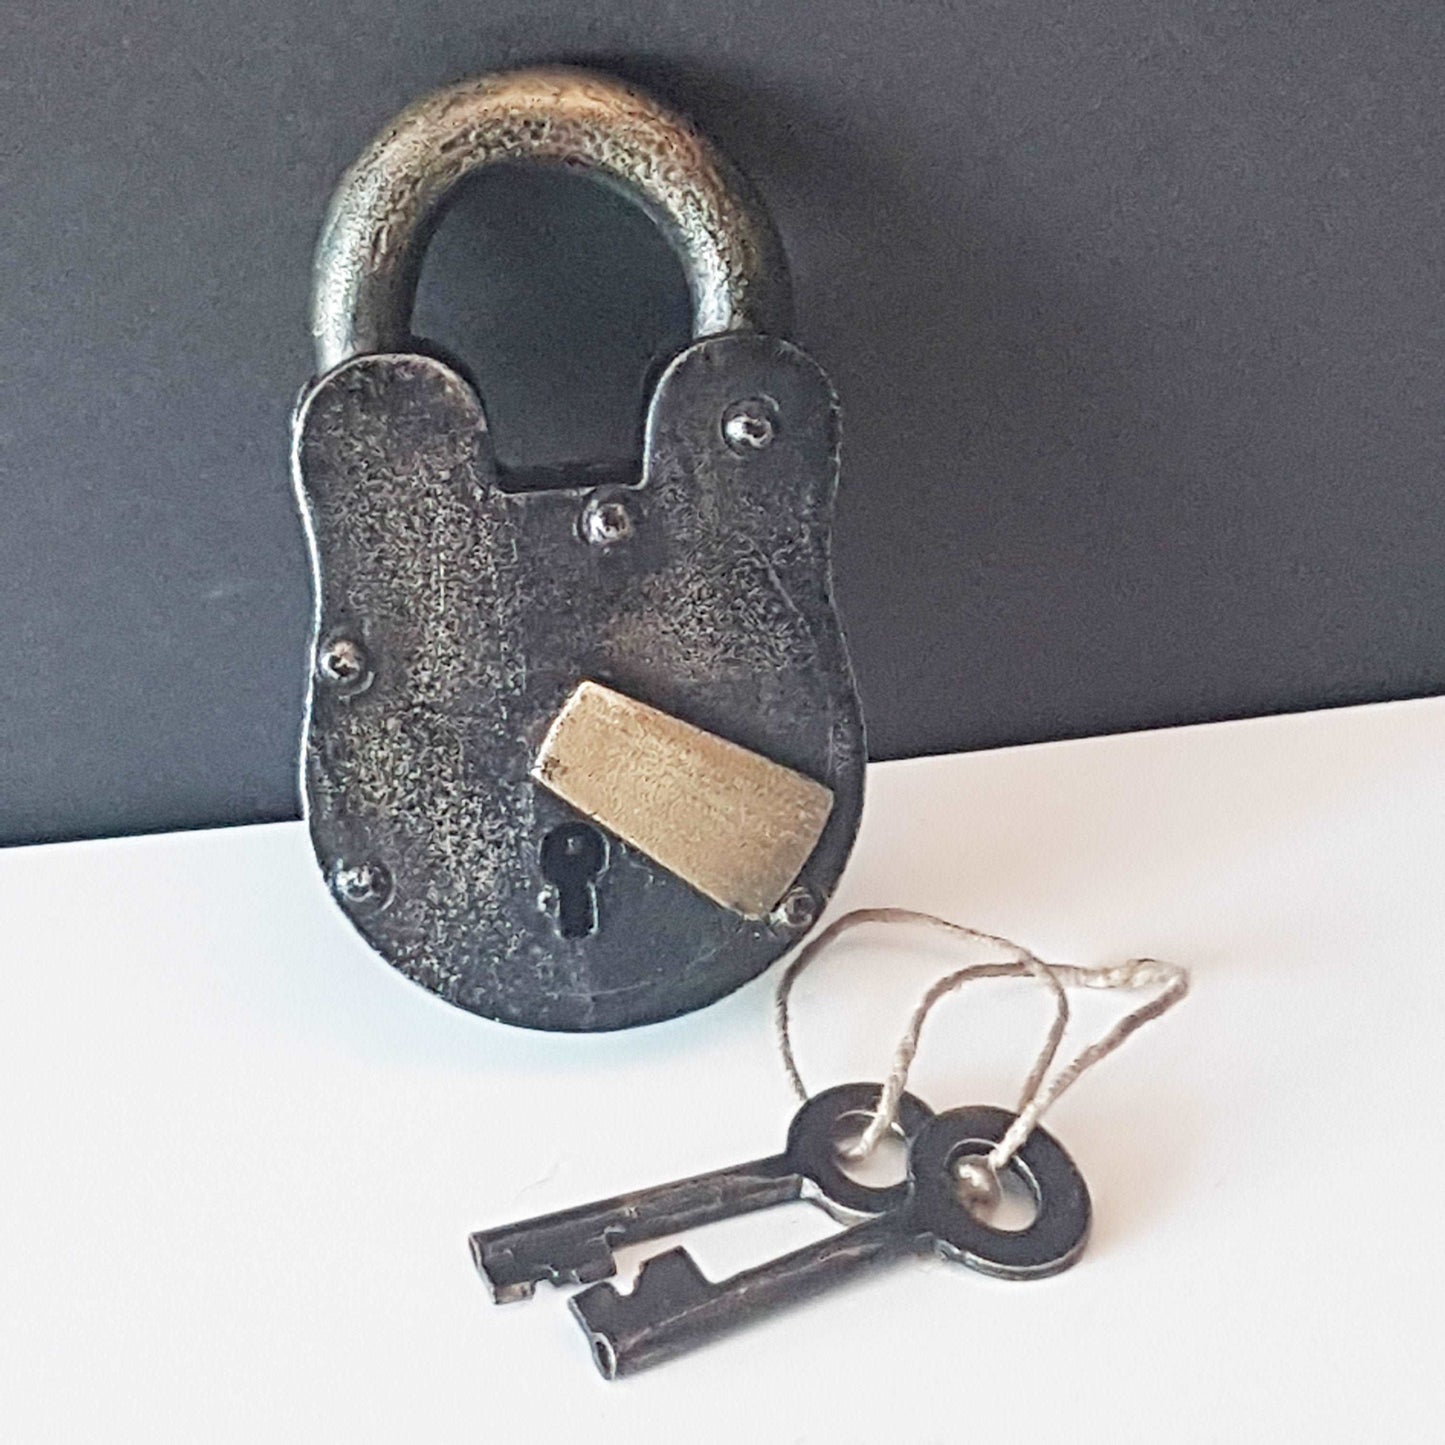 Antique metal pad lock in iron & bronze.  Padlock 4 by 3 inches with 2 vintage keys. Unique old world design. Functional lock collectible.